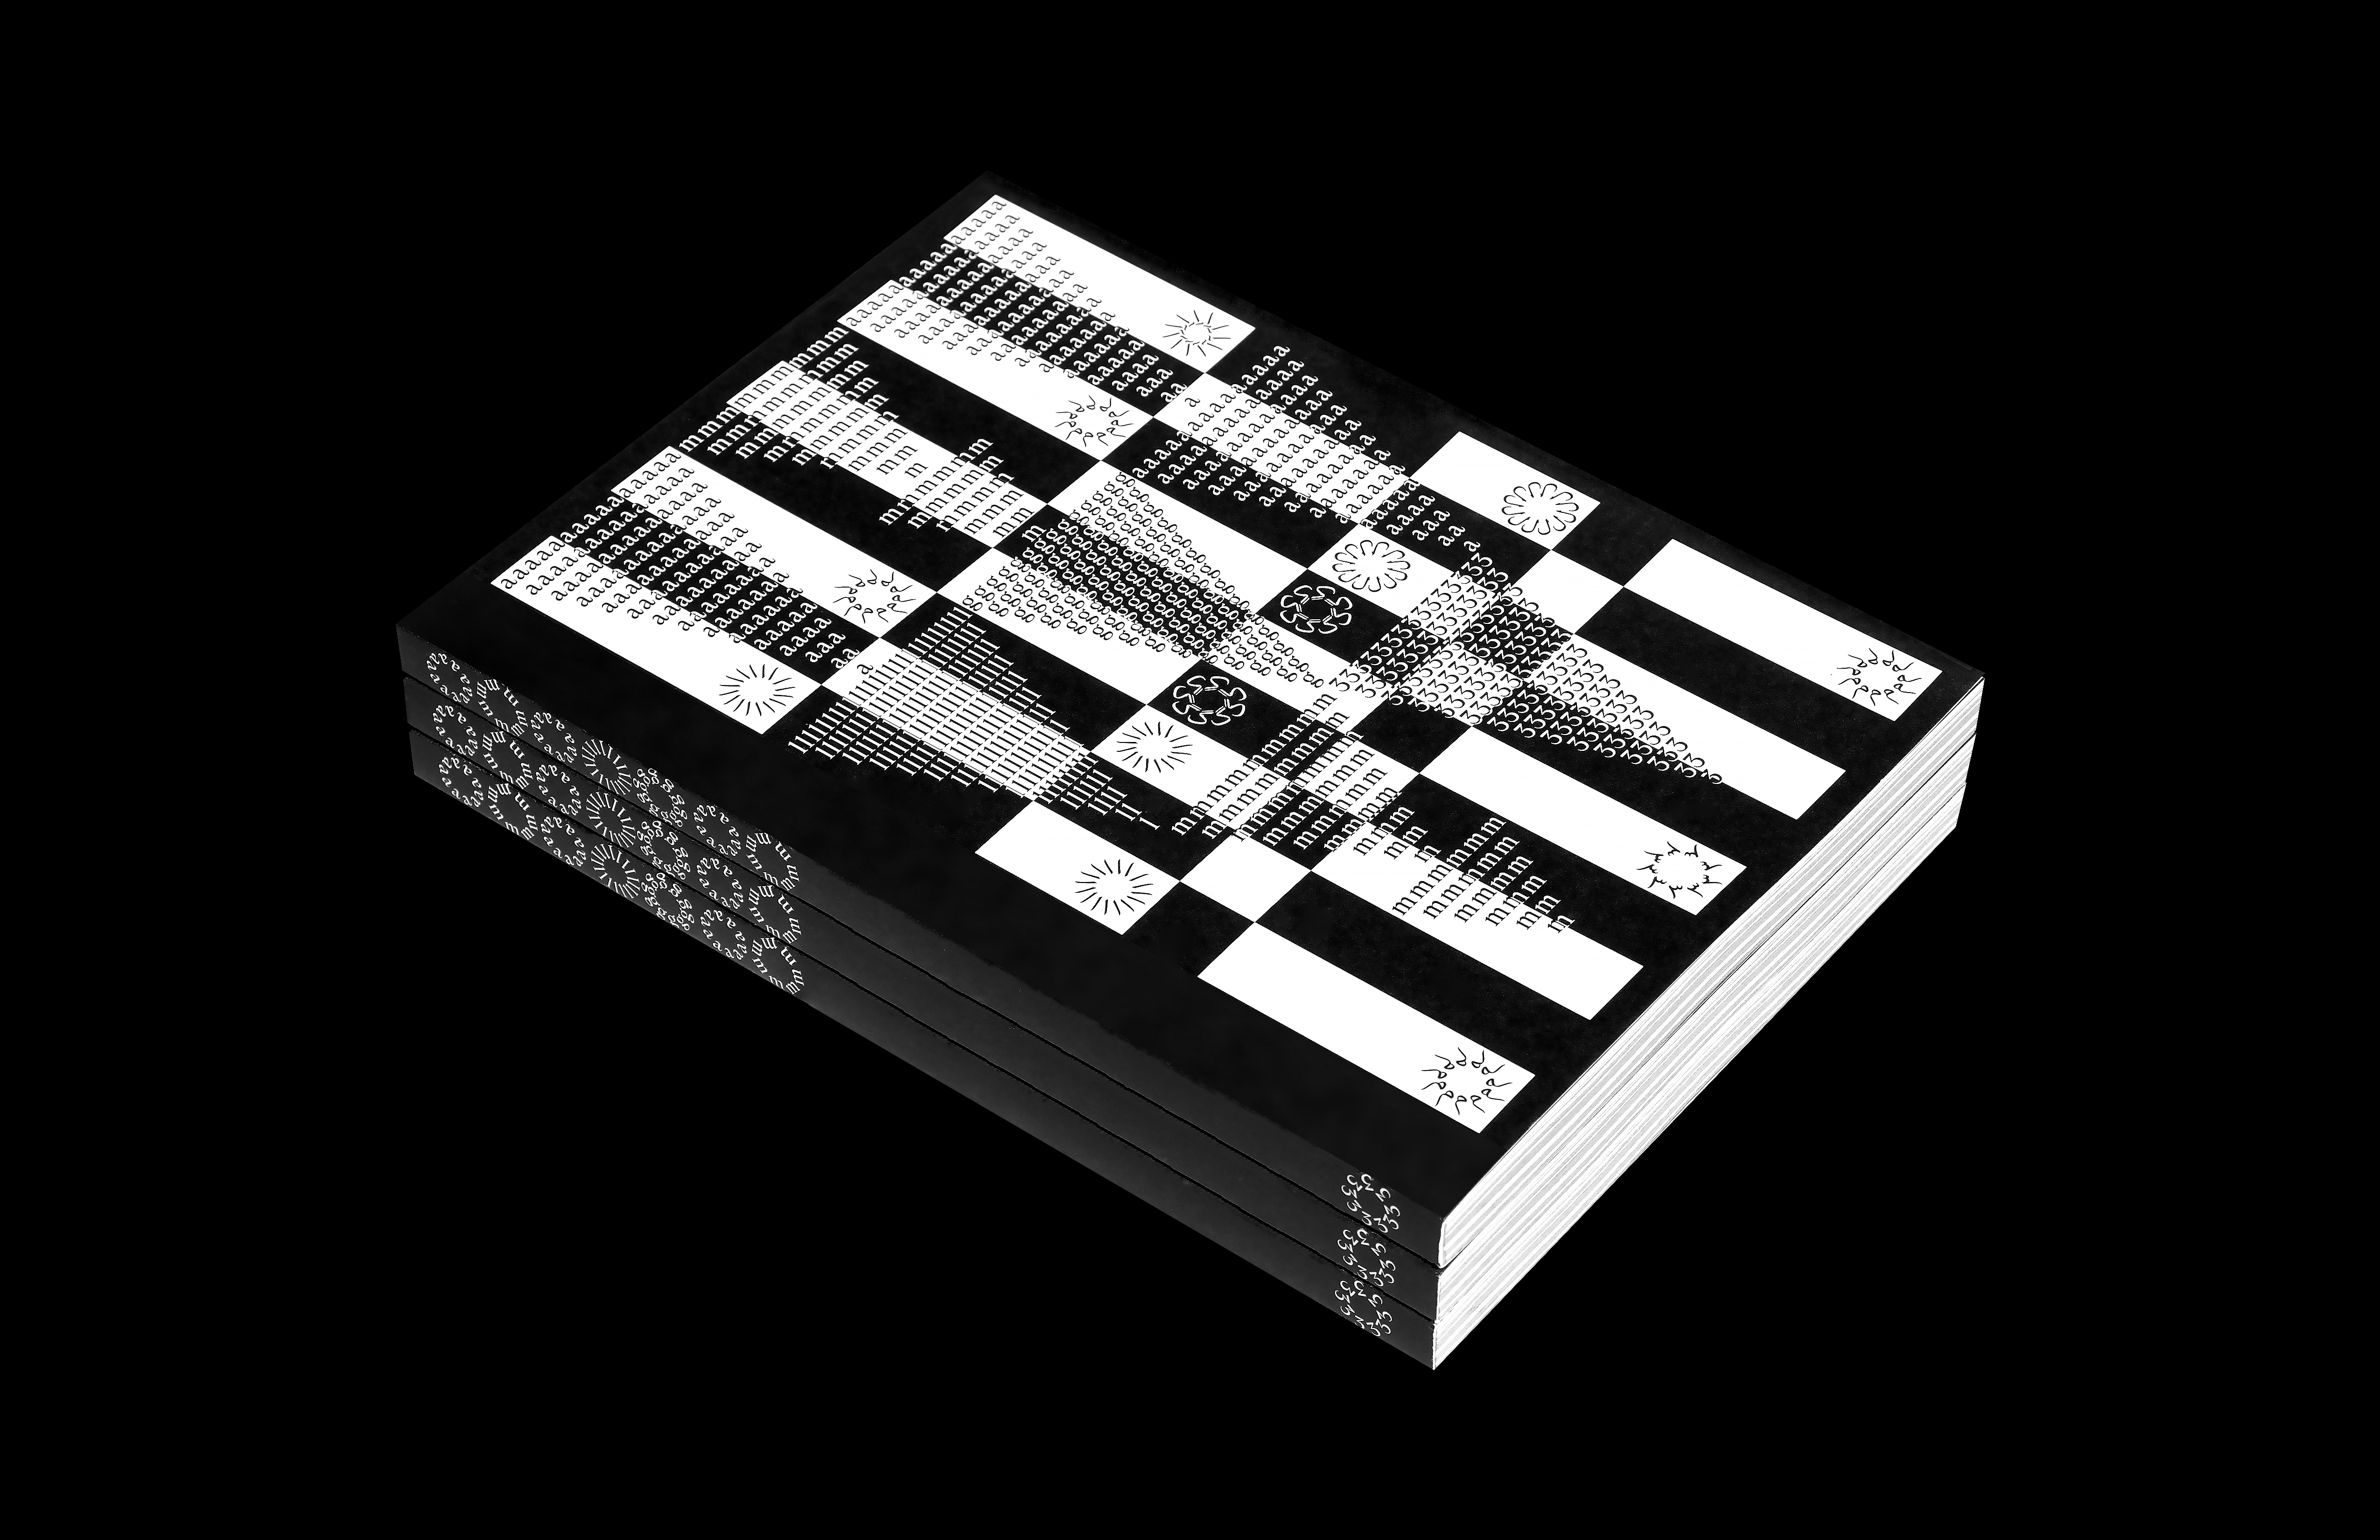 intricately designed book cover in black and white